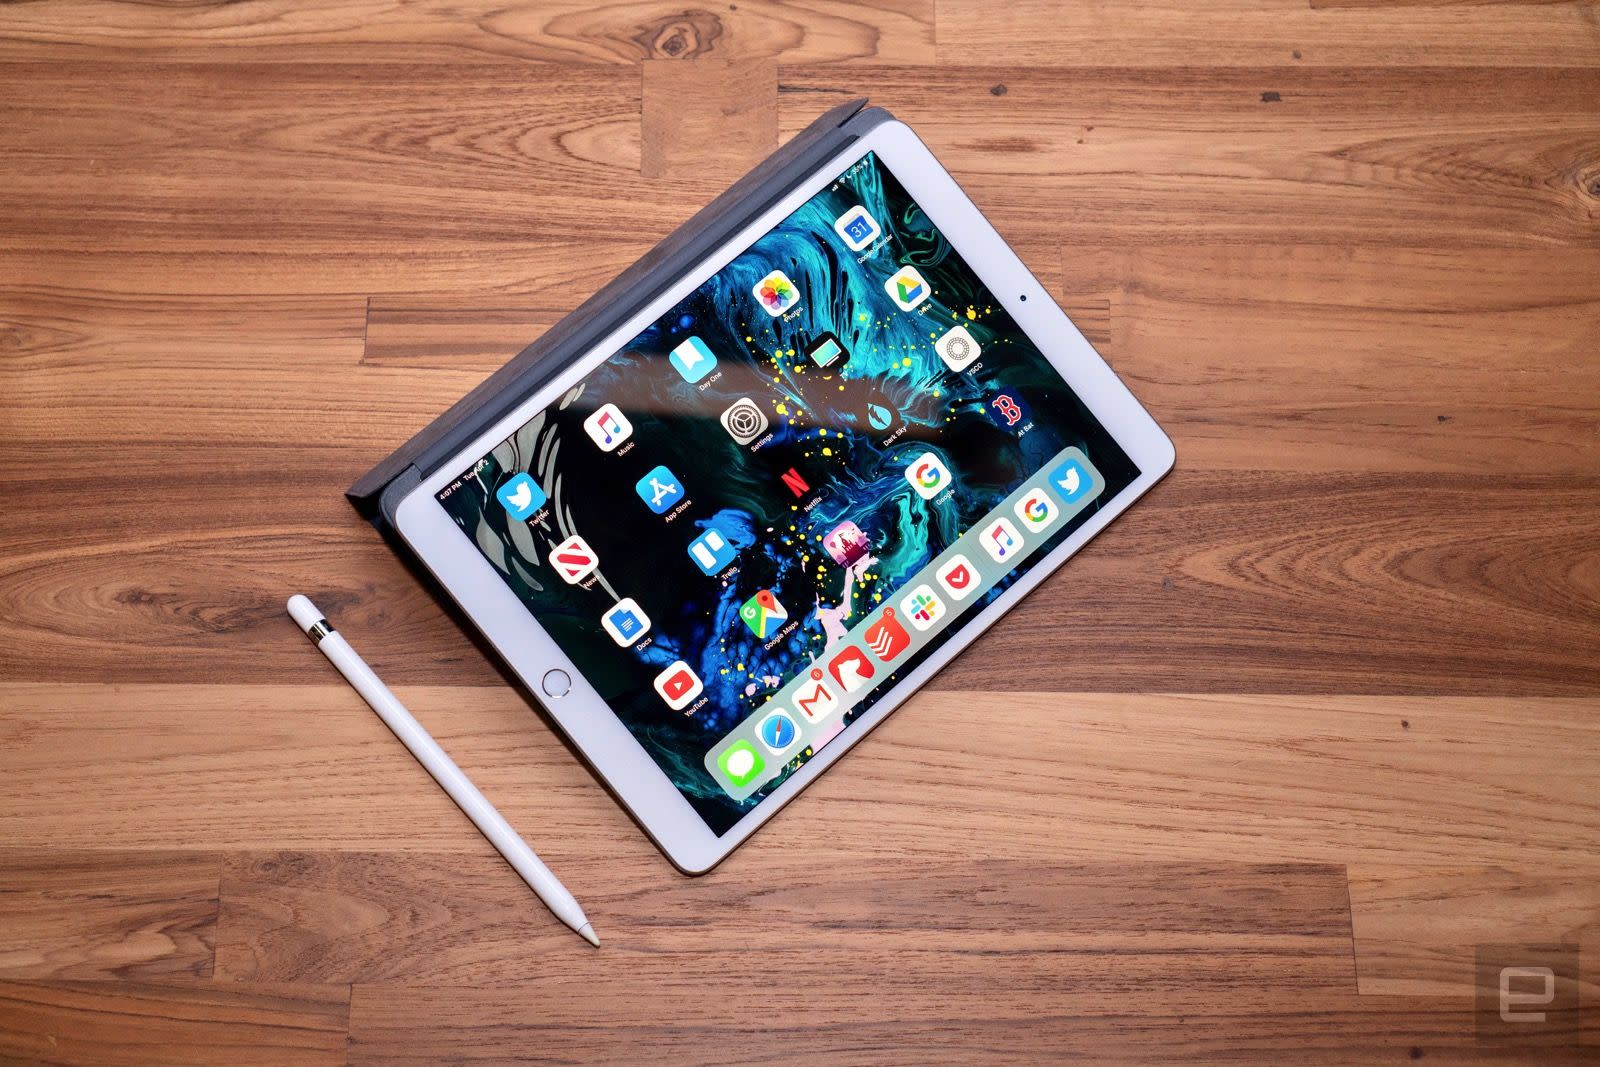 Apple's 256GB iPad Air is on sale for 549 Engadget